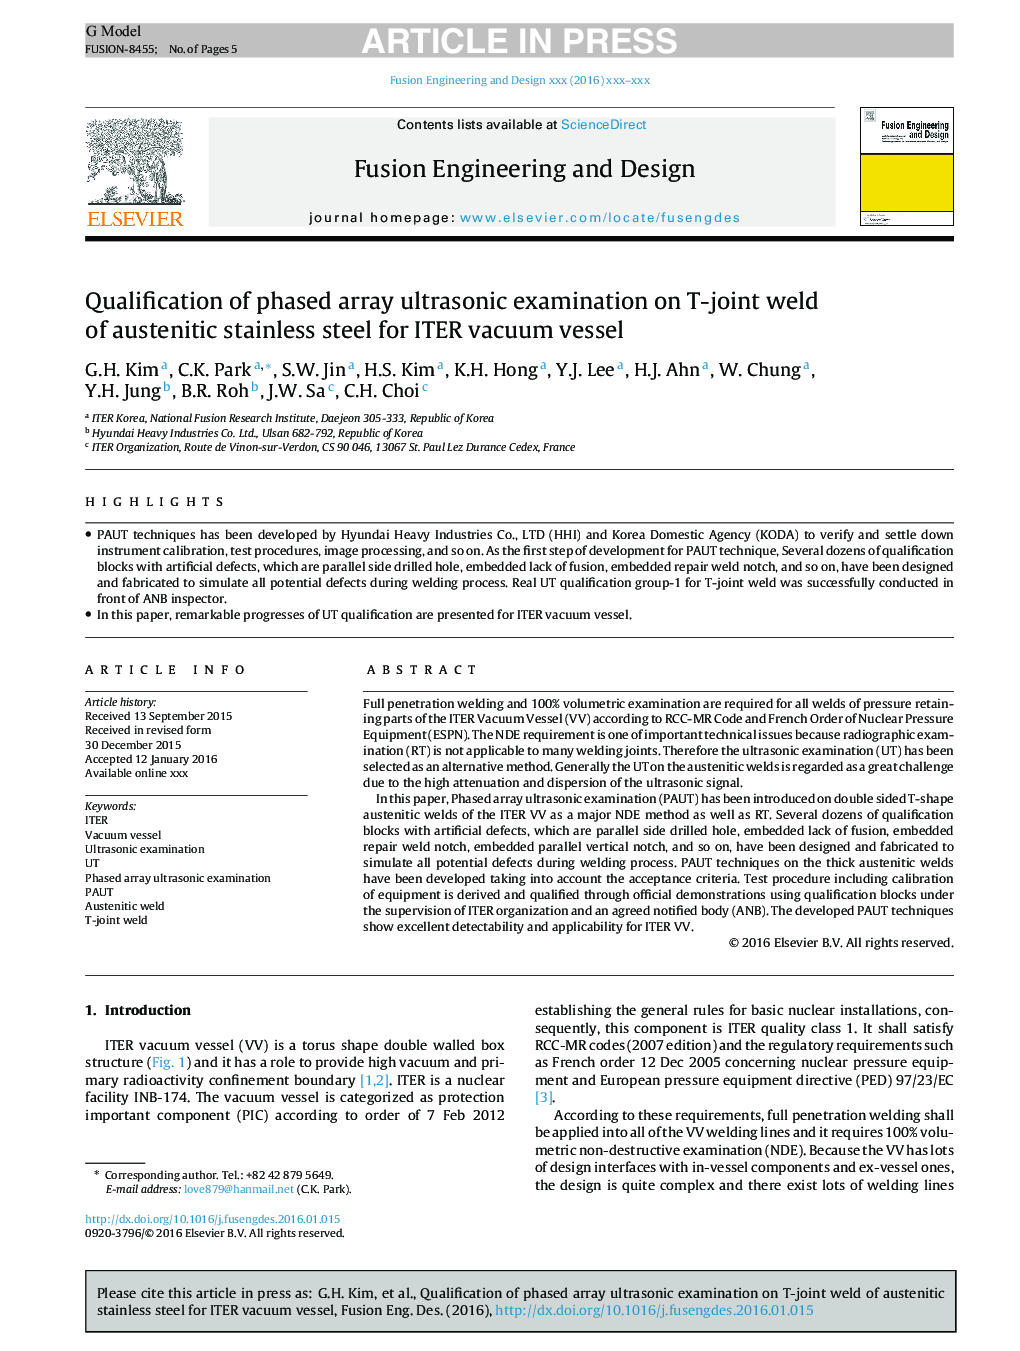 Qualification of phased array ultrasonic examination on T-joint weld of austenitic stainless steel for ITER vacuum vessel